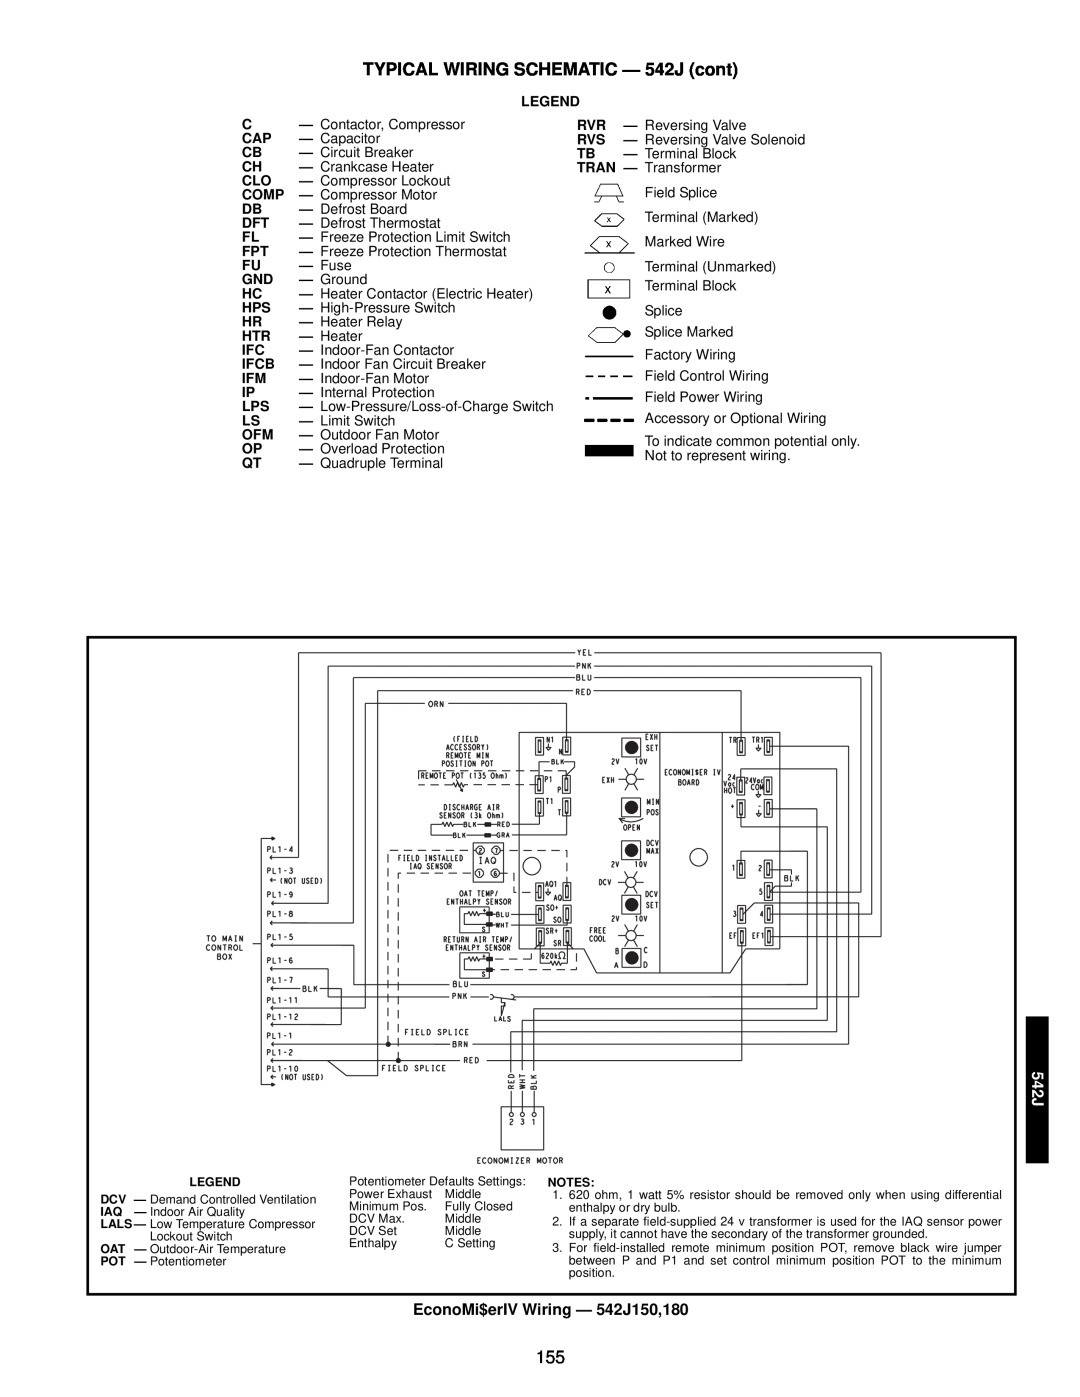 Bryant 549C manual TYPICAL WIRING SCHEMATIC — 542J cont, EconoMi$erIV Wiring — 542J150,180, a48-7992 